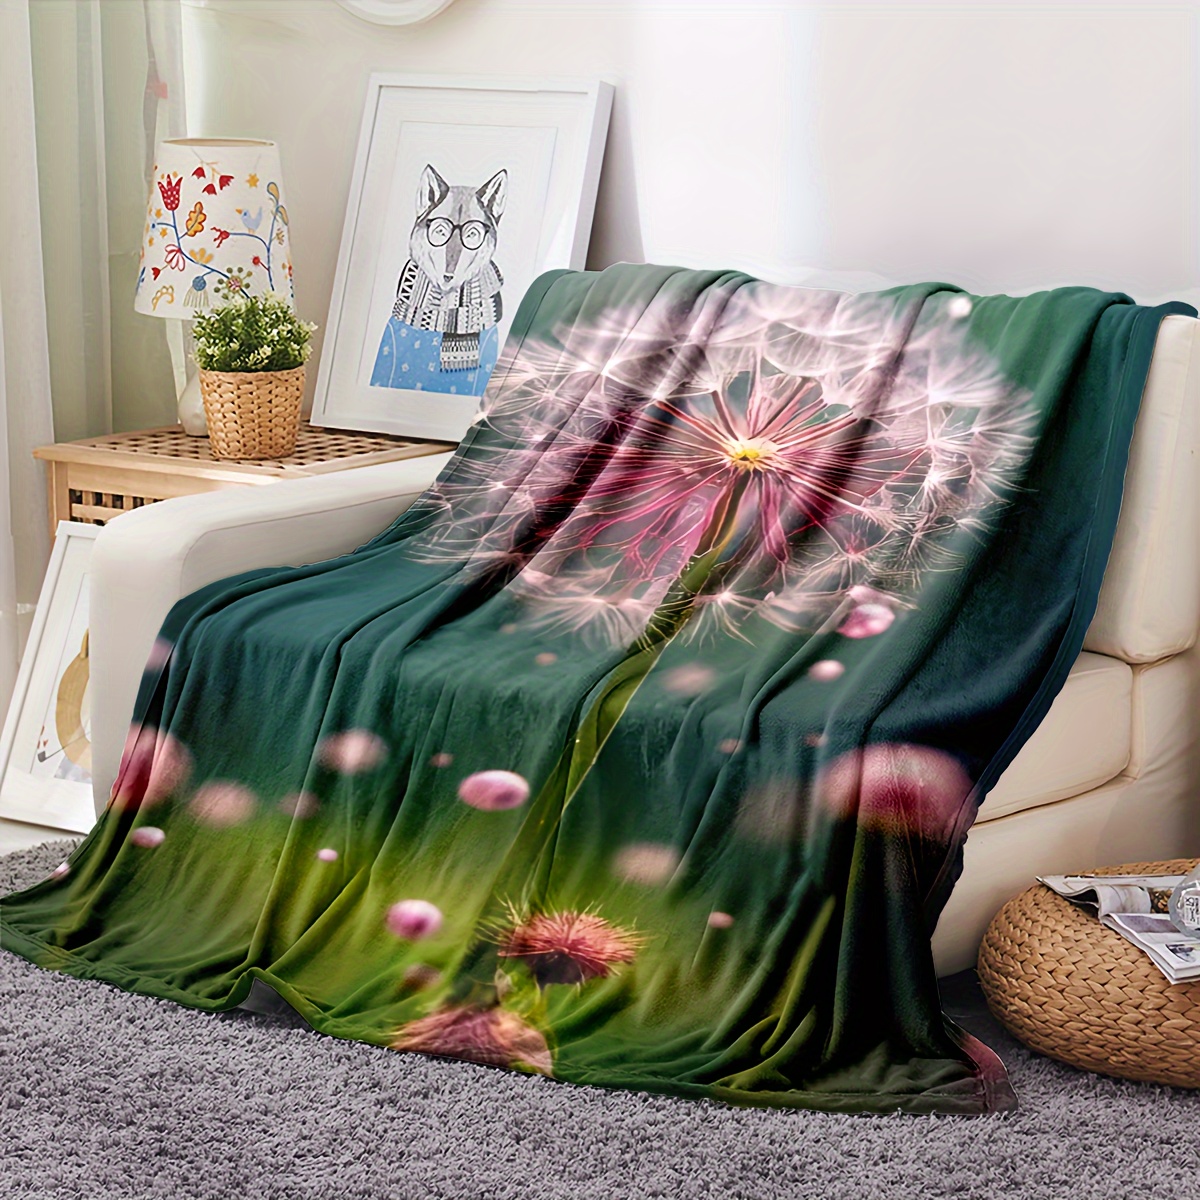 1pc Dandelion Printed Flannel Blanket Air Conditioning Decorative Throw  Blanket Office Nap Blanket Multi-purpose Blanket Small Blanket, Nap Blanket  Gi